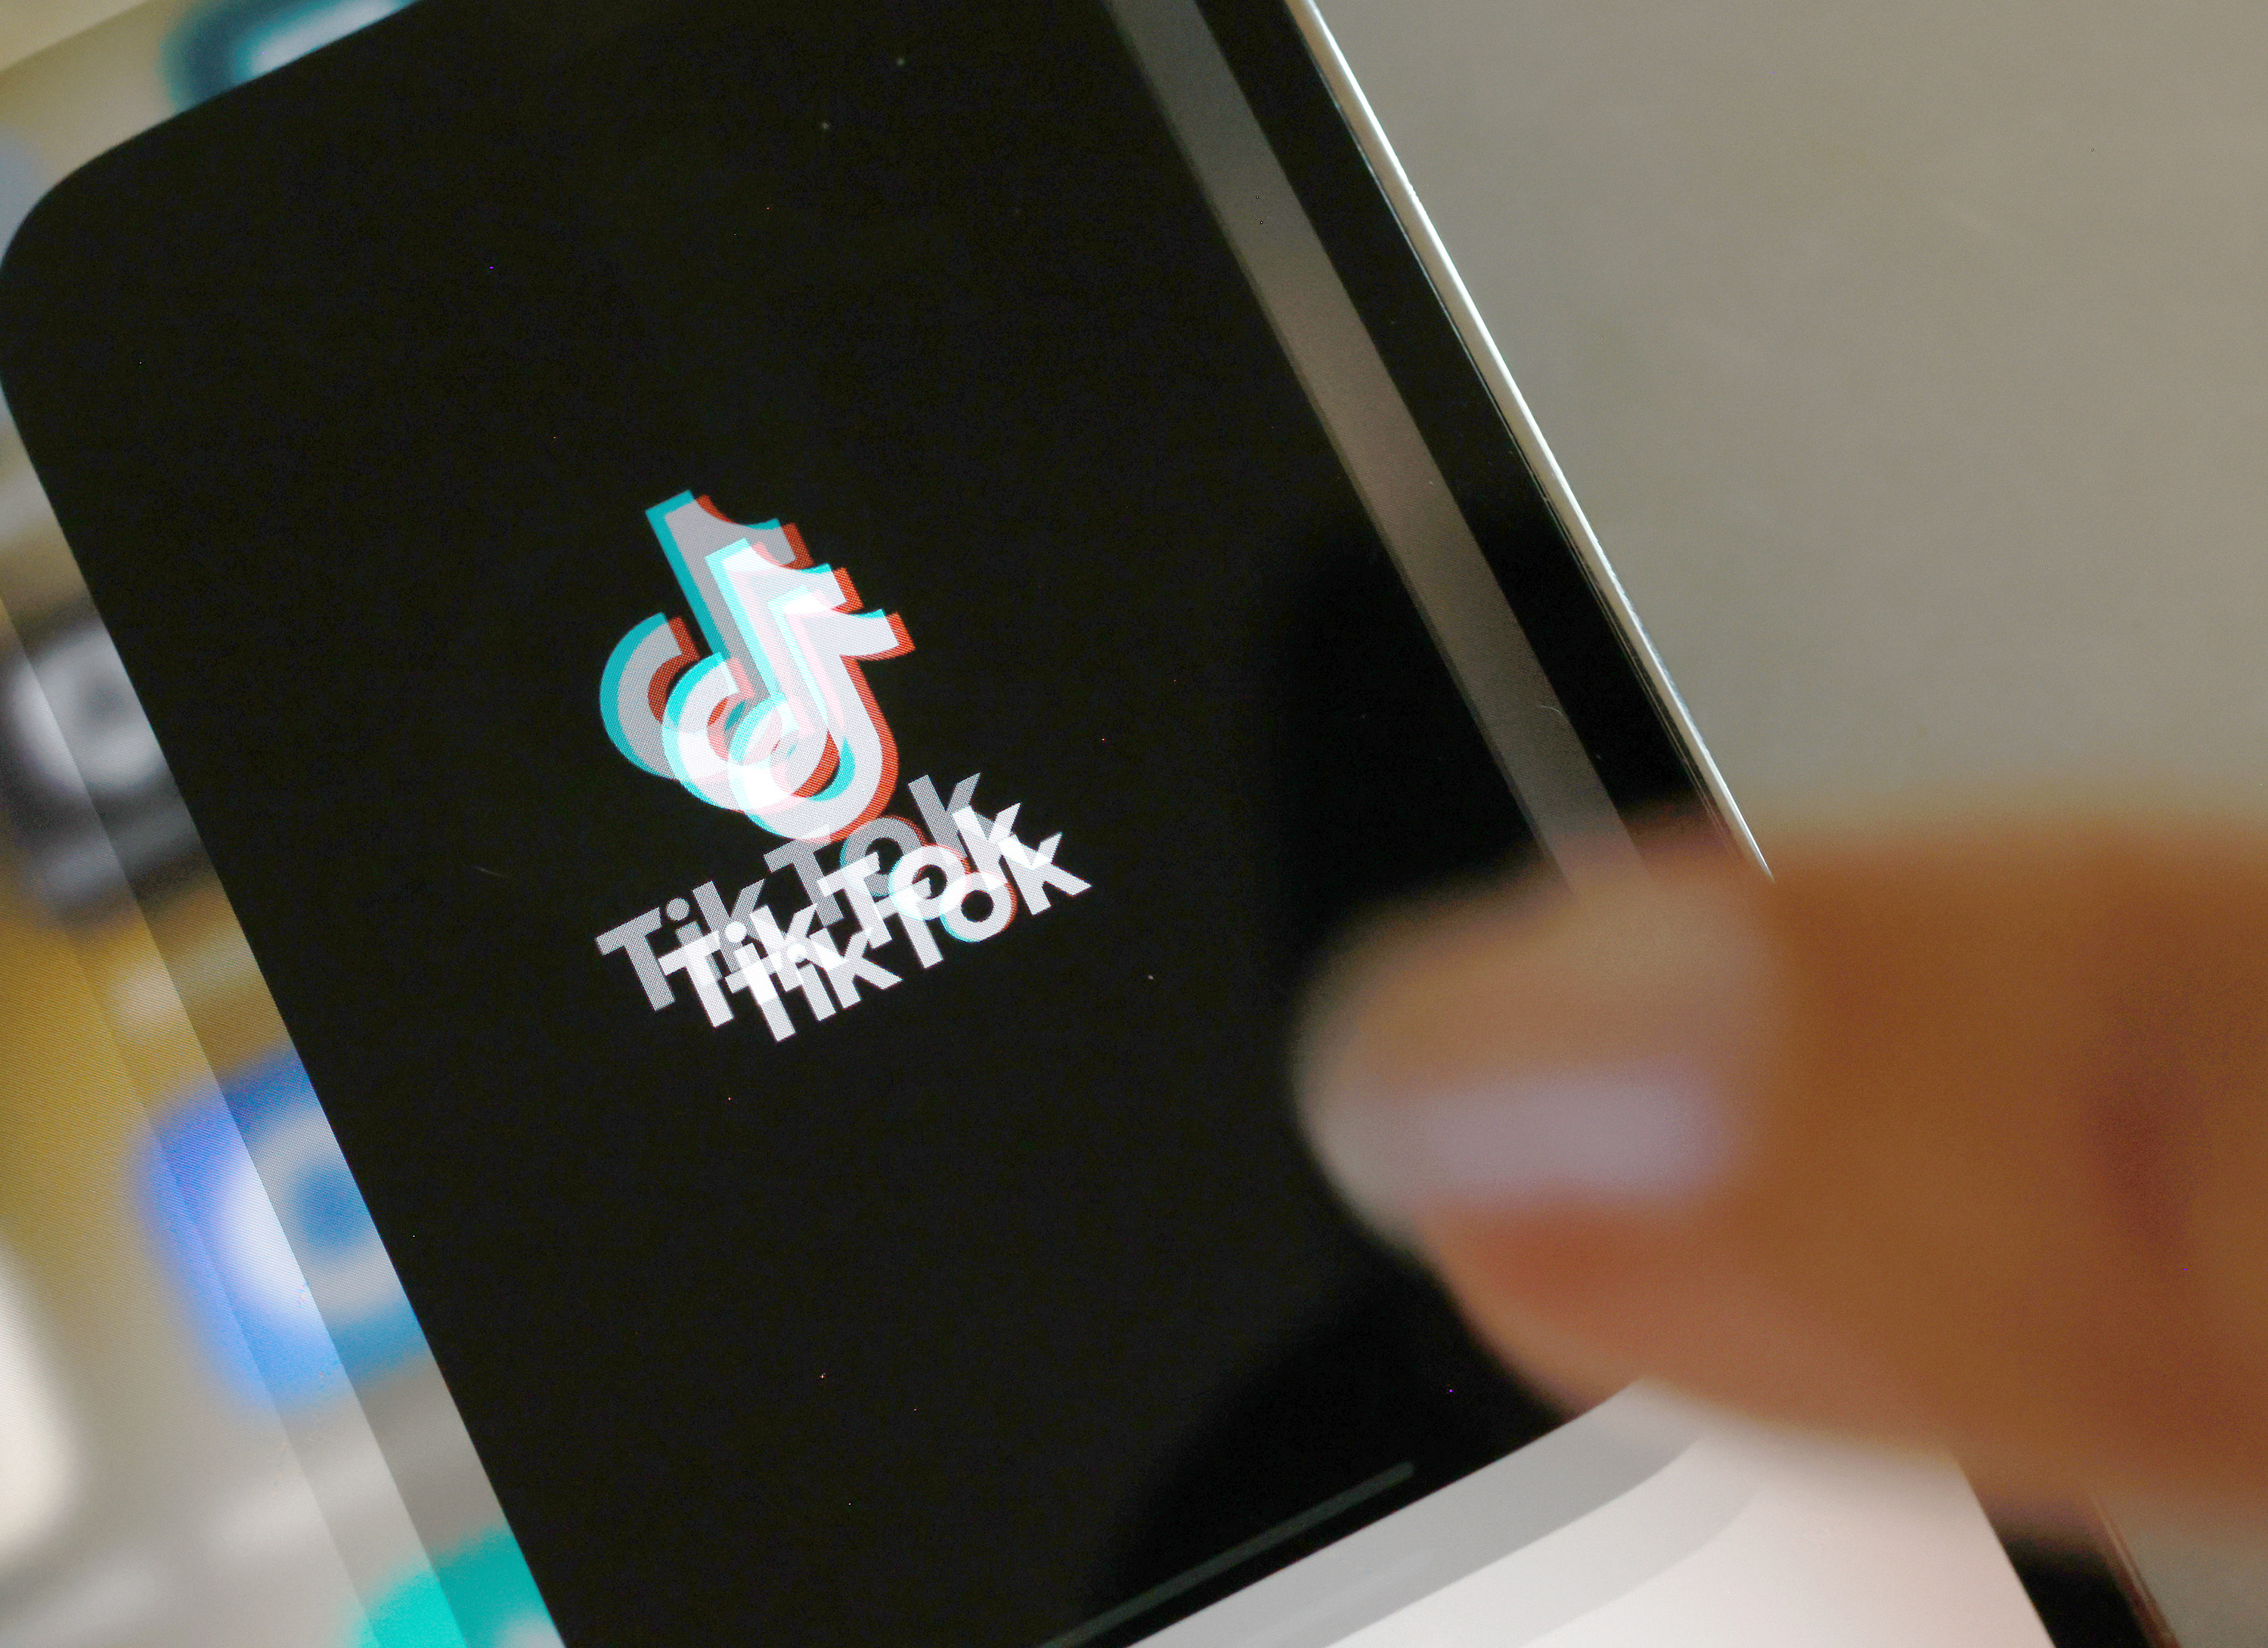 A photo illustration of the TikTok app, displayed on a phone screen. The logo is blurred as if from rapid movement.